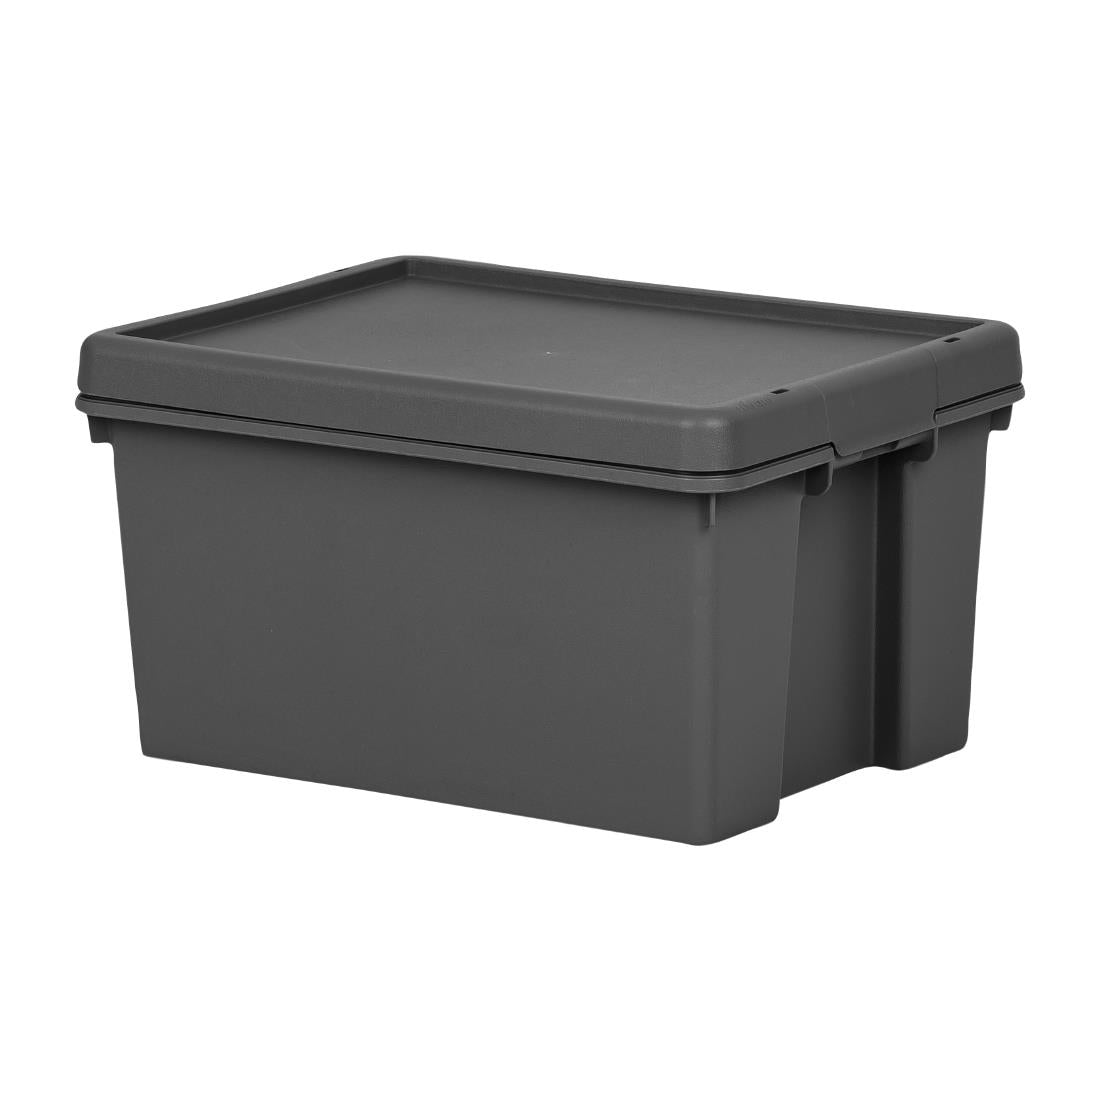 CX090 Wham Bam Recycled Storage Box & Lid Black 16Ltr JD Catering Equipment Solutions Ltd